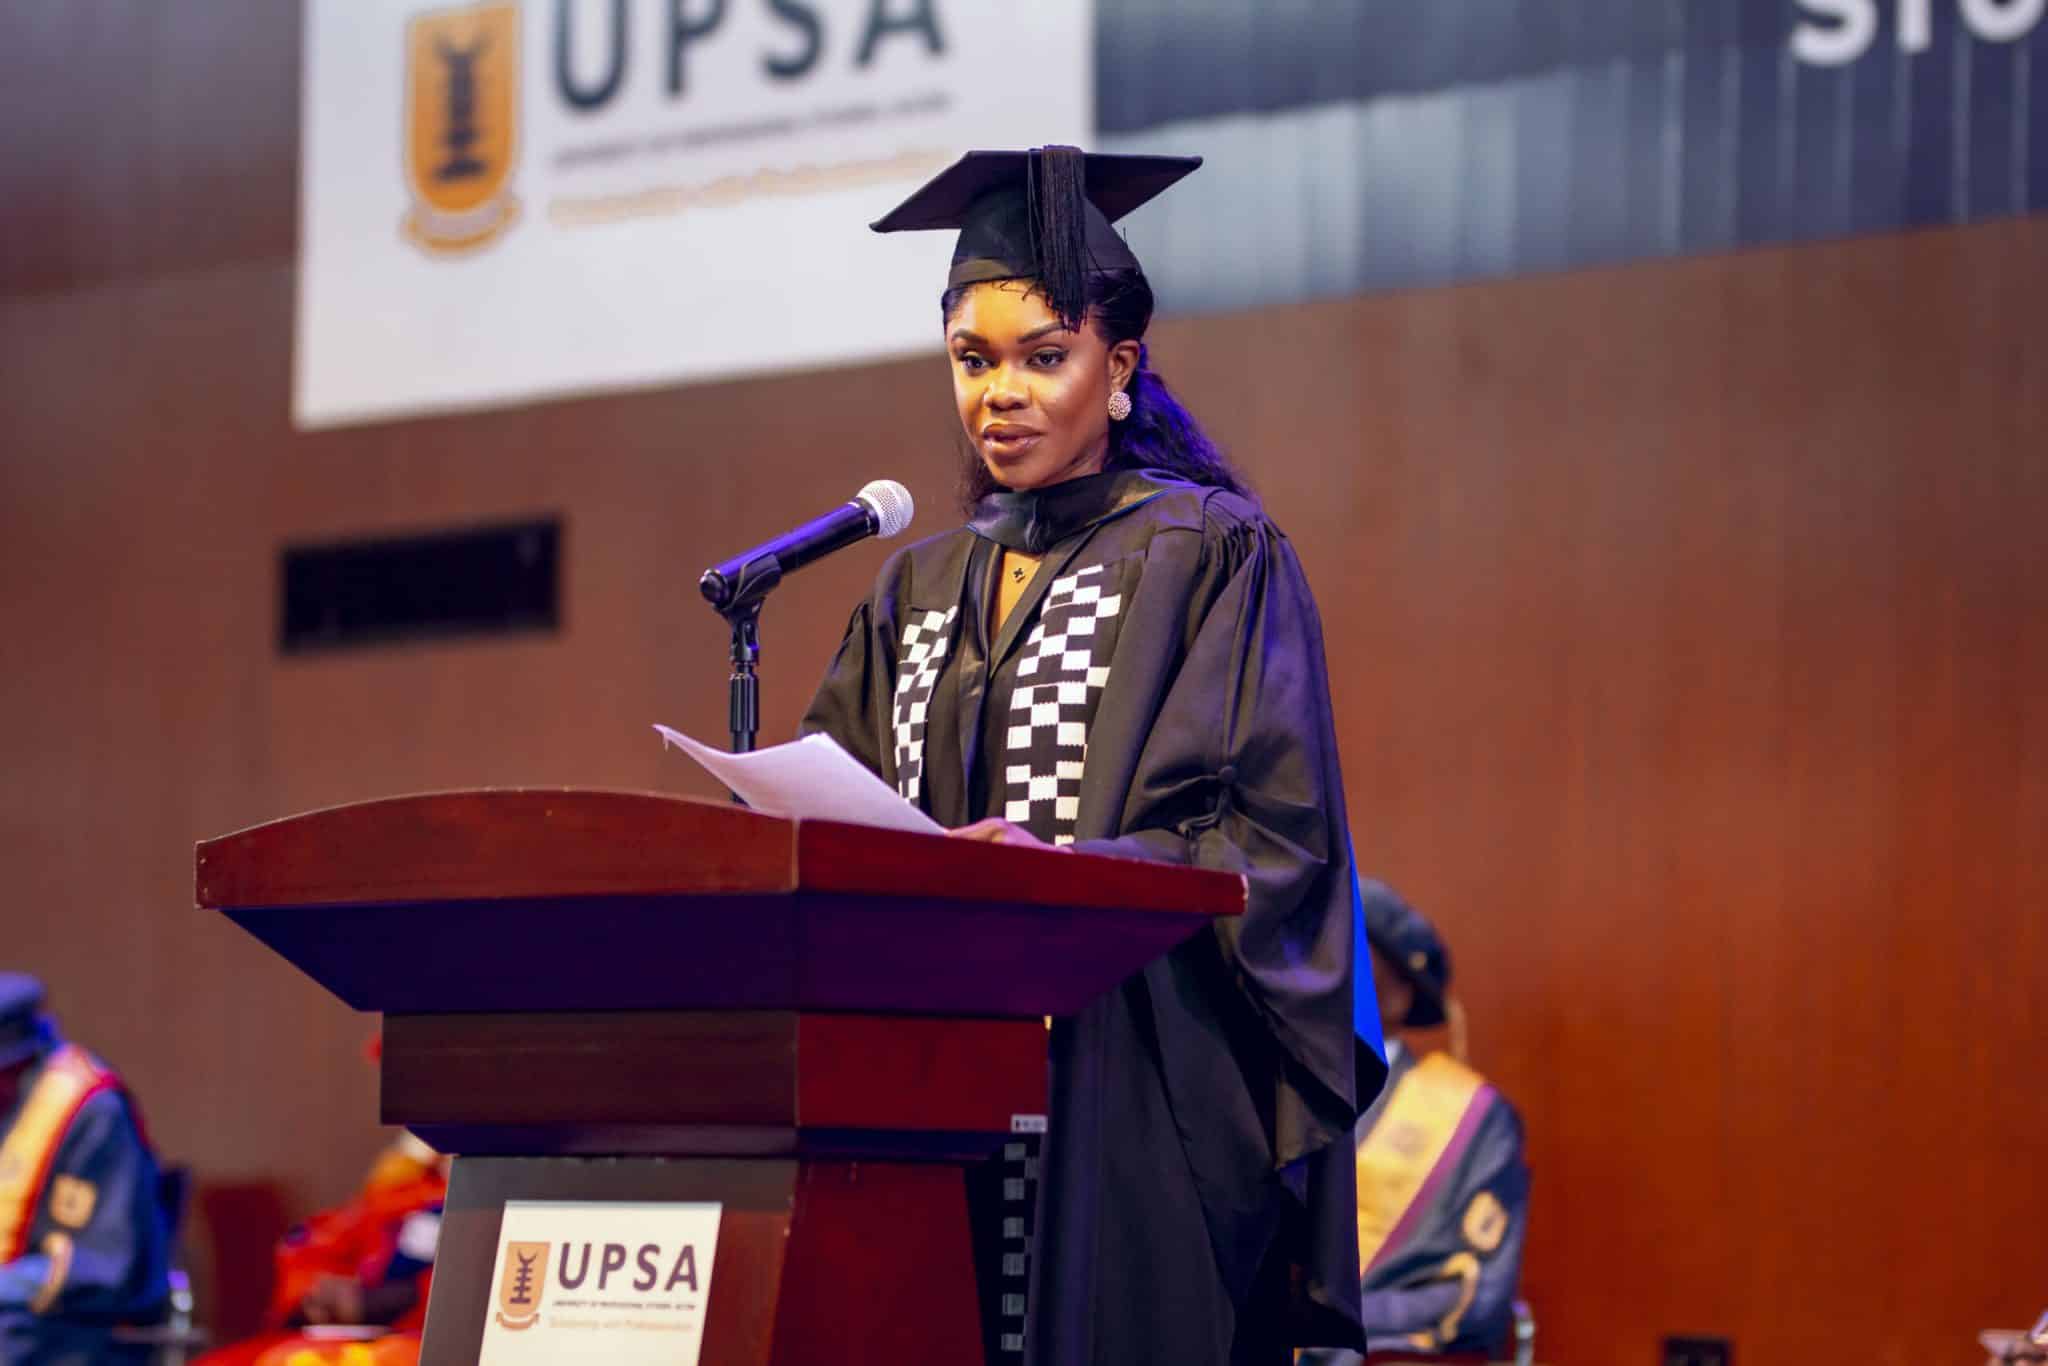 Read more about the article Musician Becca graduates from UPSA with a 3.92 GPA and is named Valedictorian